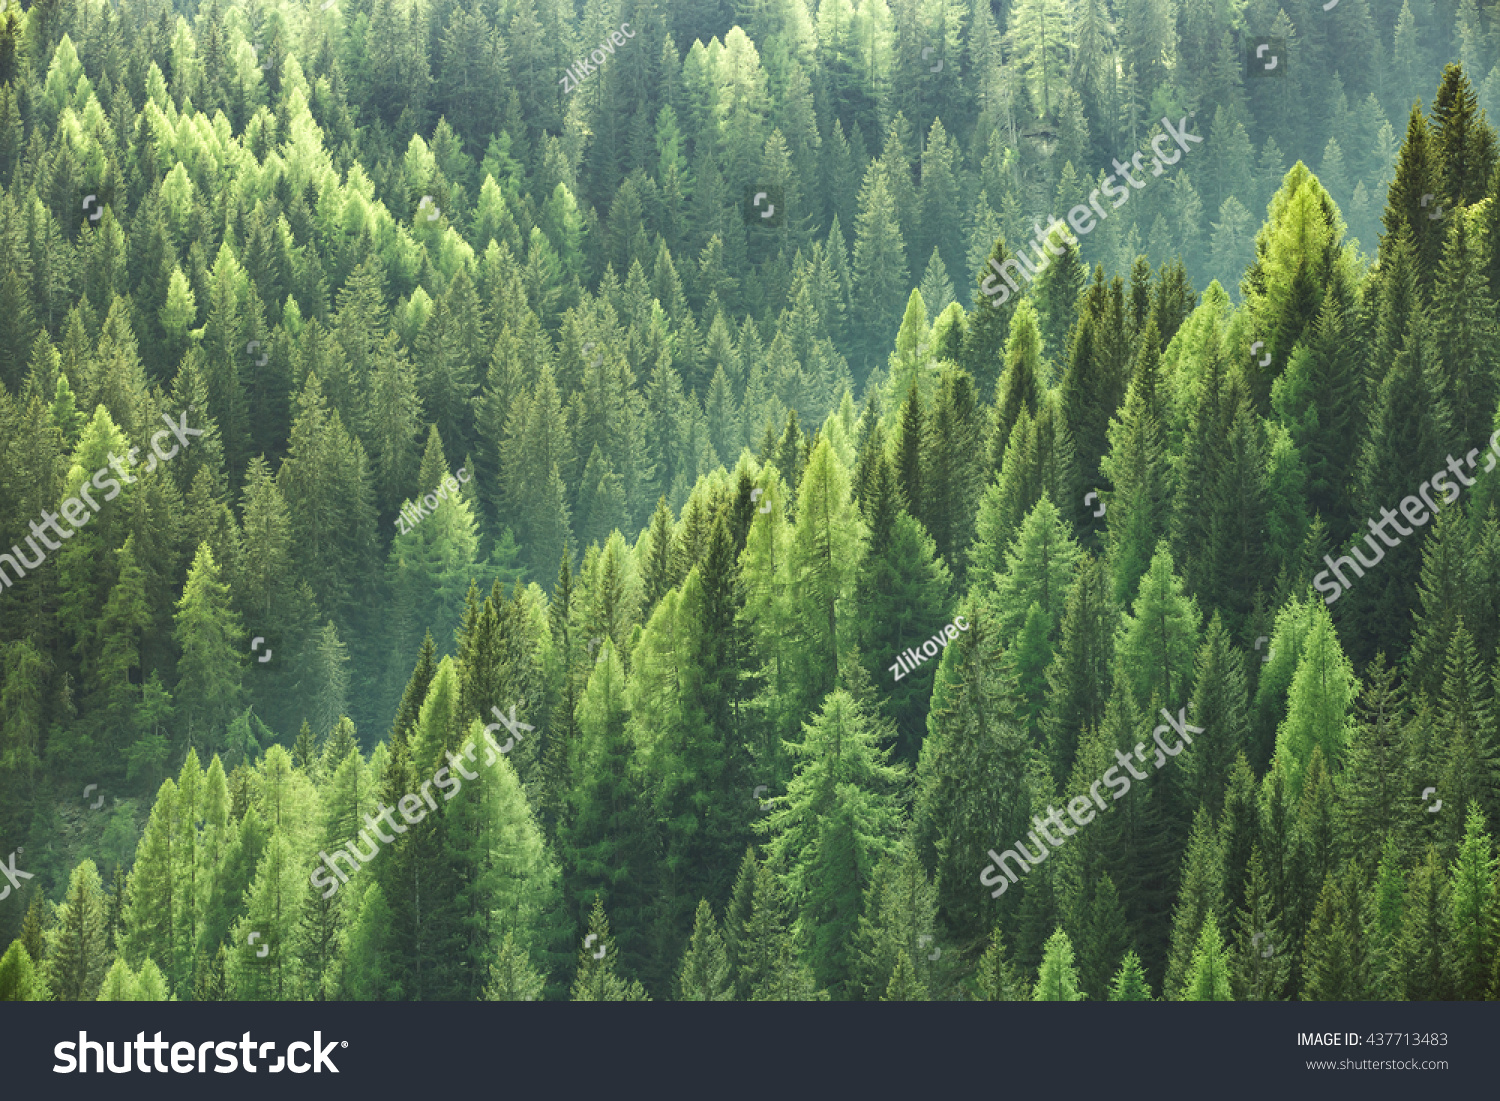 Healthy green trees in a forest of old spruce, fir and pine trees in wilderness of a national park. Sustainable industry, ecosystem and healthy environment concepts and background.
 #437713483